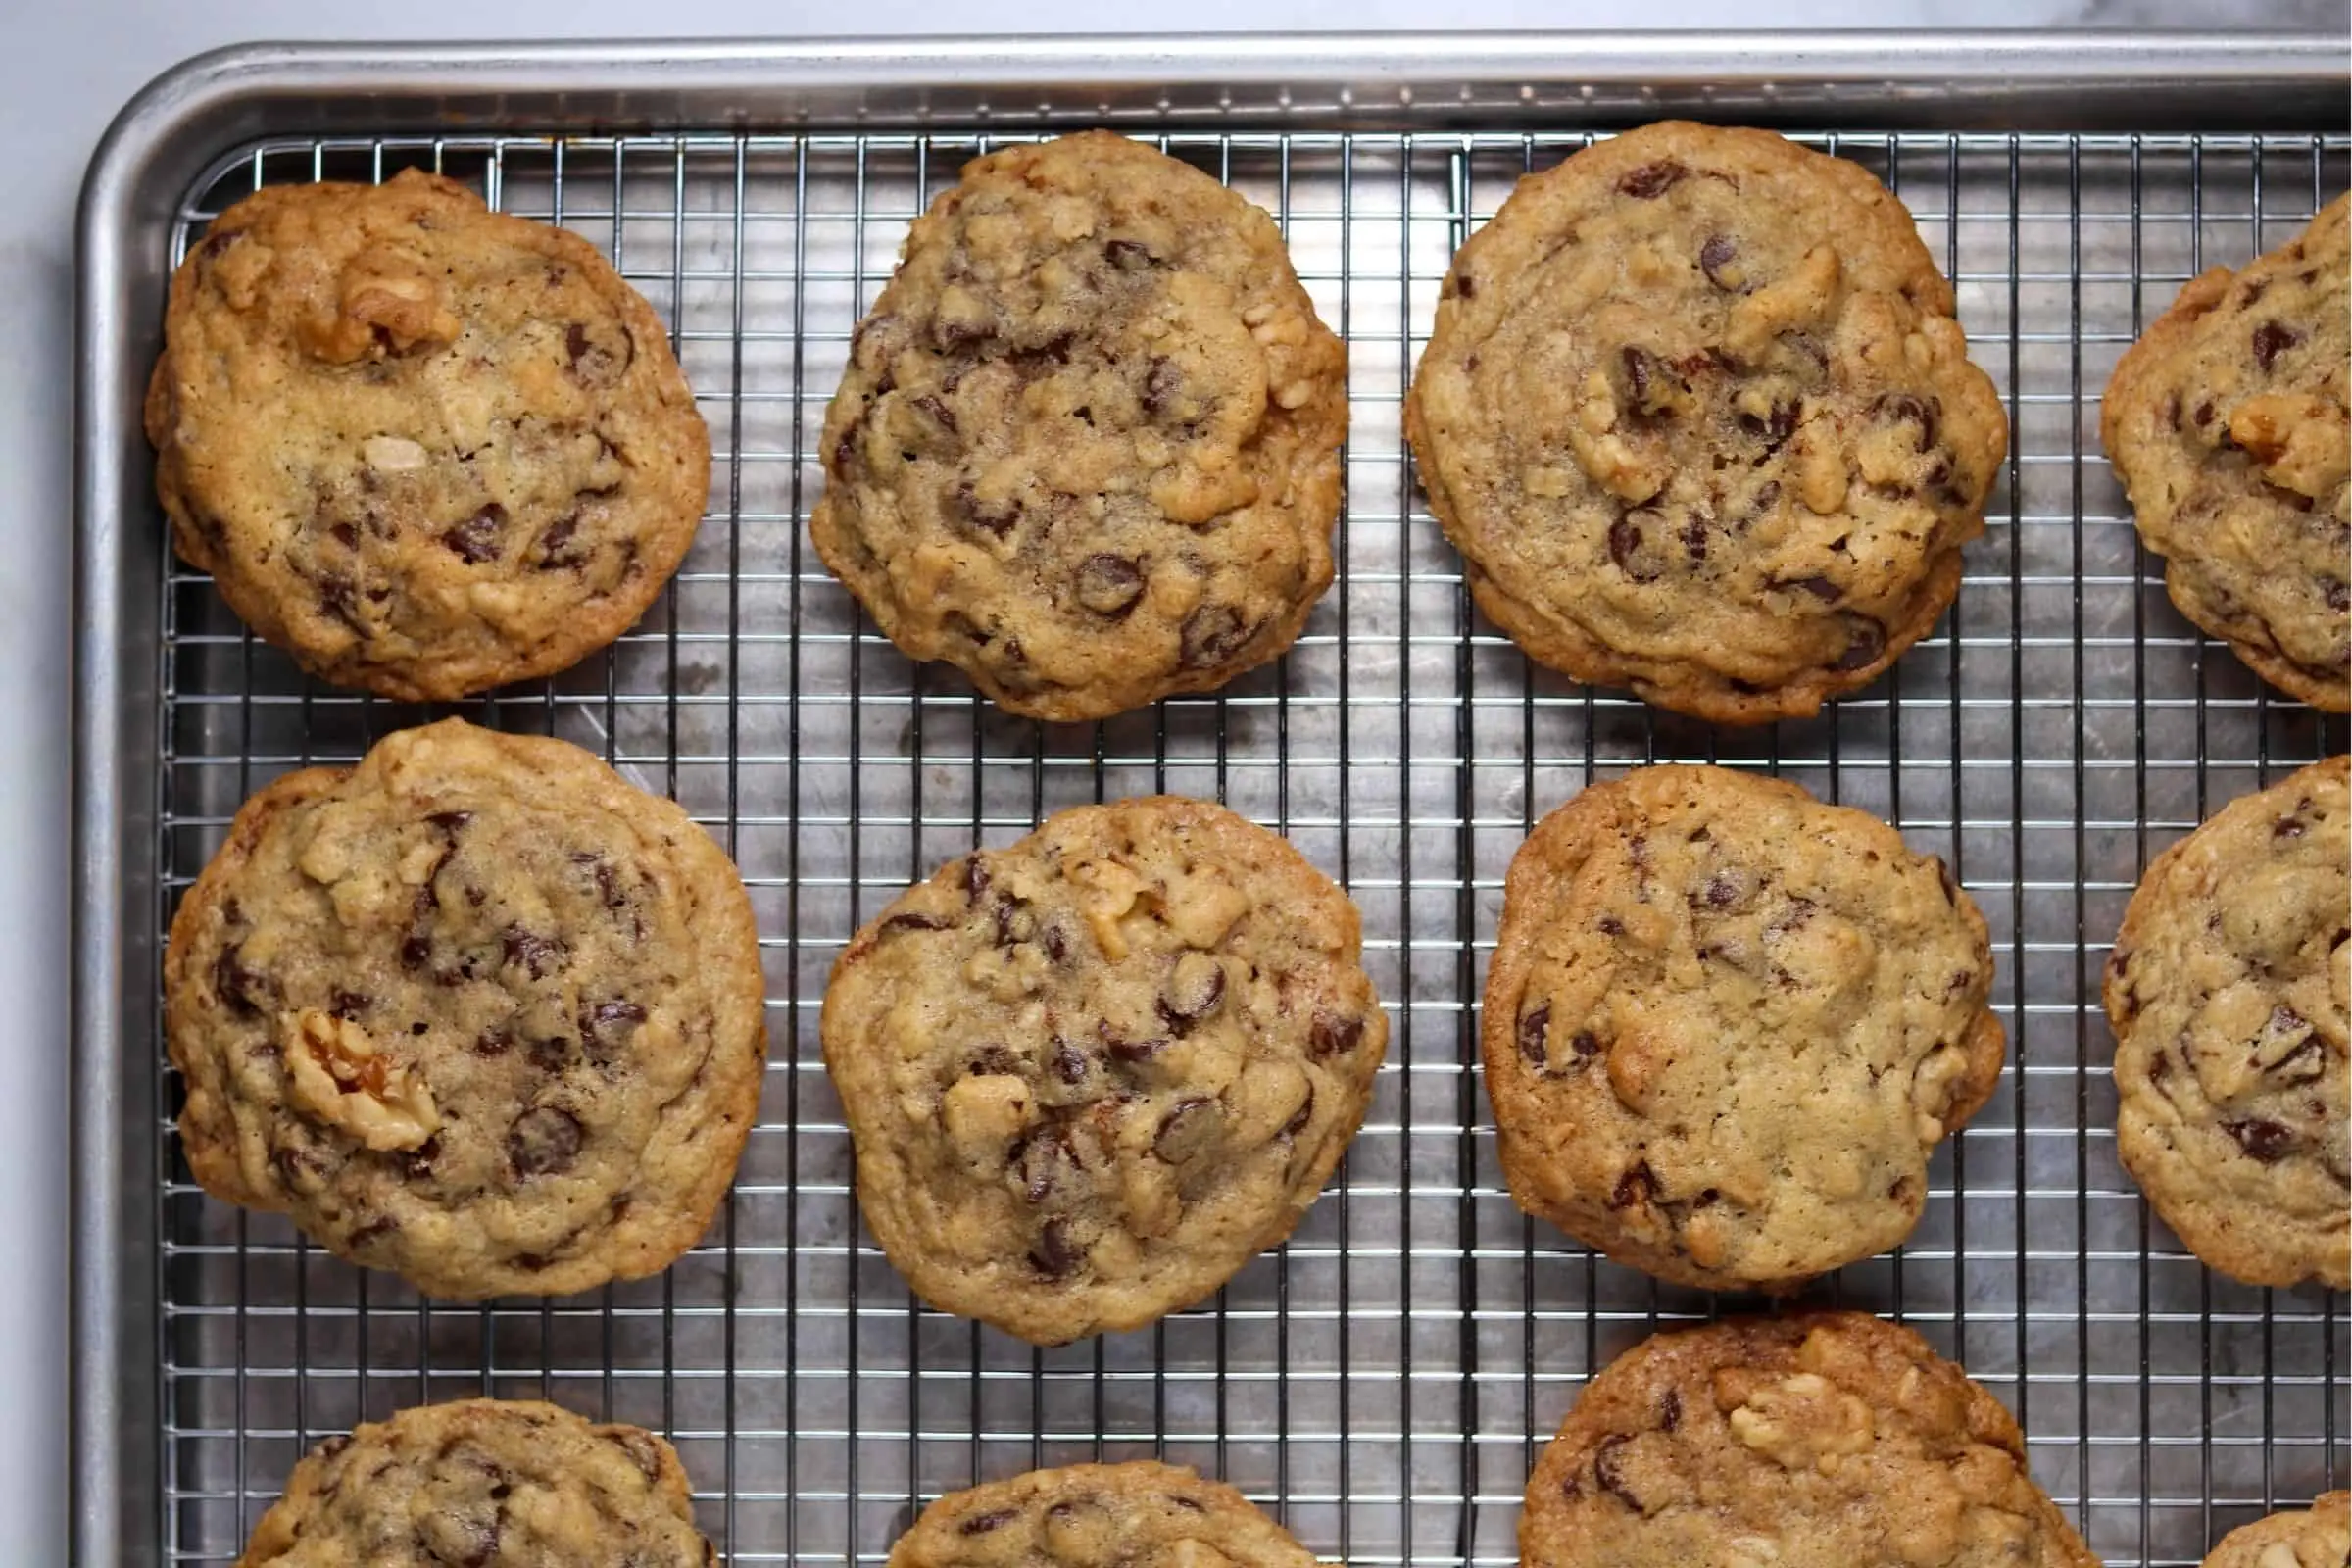 smoked chocolate chip cookies - Is it OK to eat chocolate chip cookies